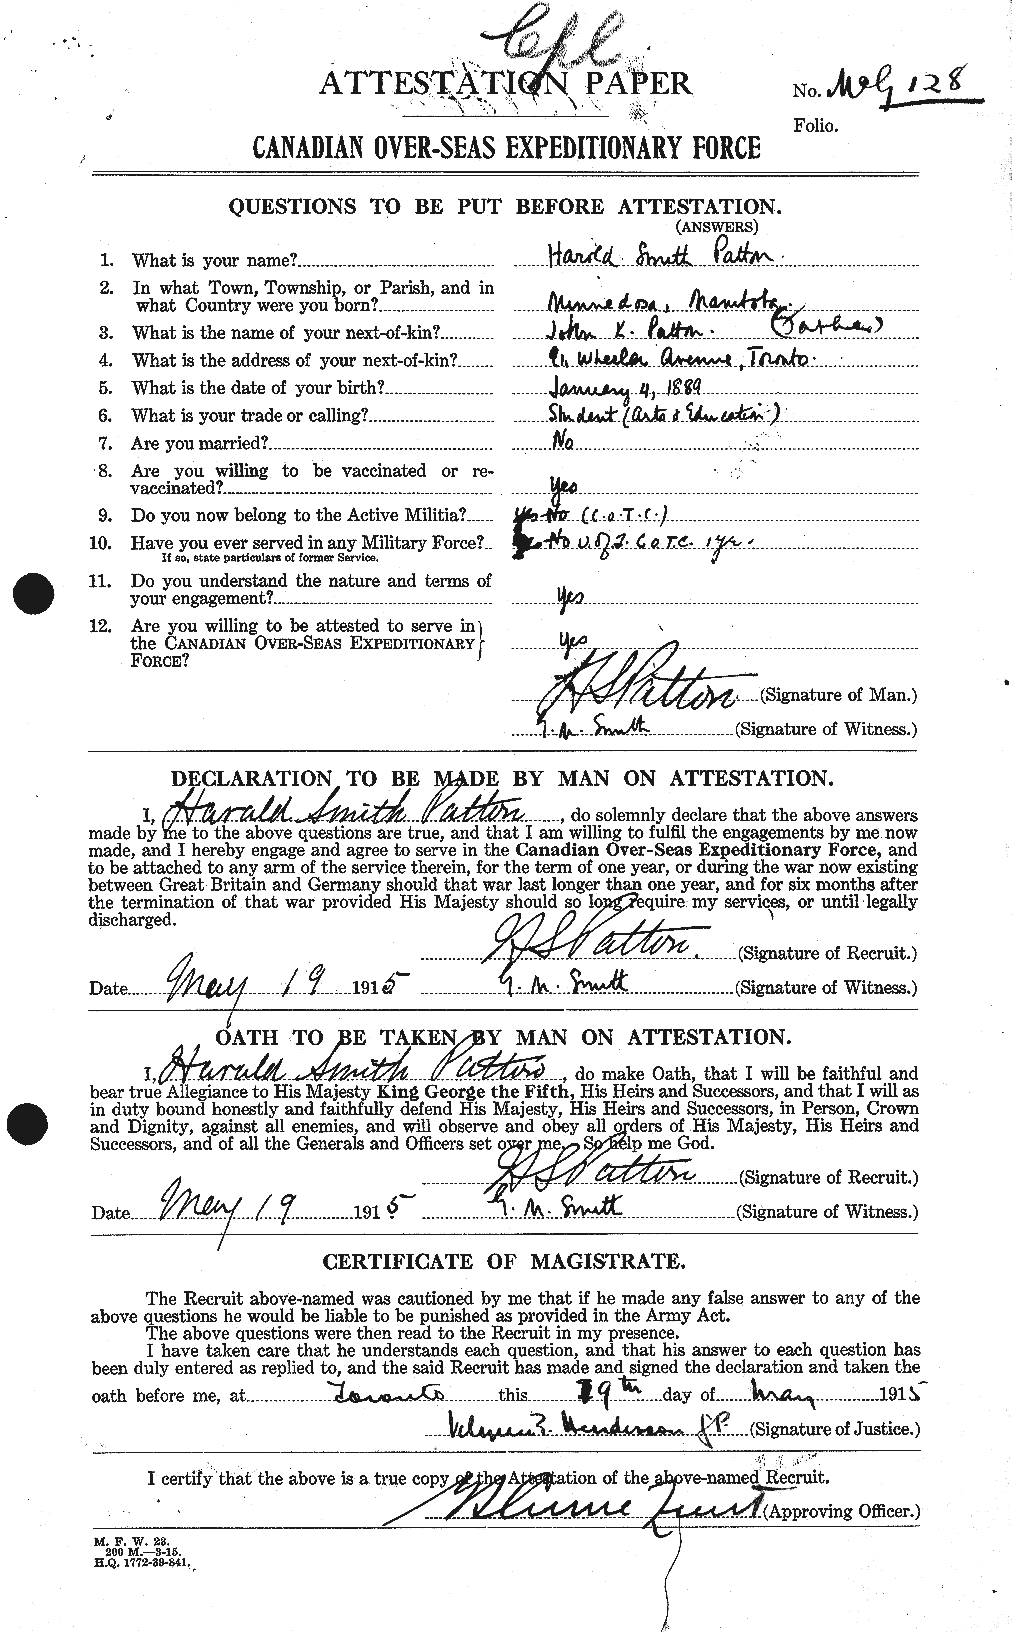 Personnel Records of the First World War - CEF 569021a